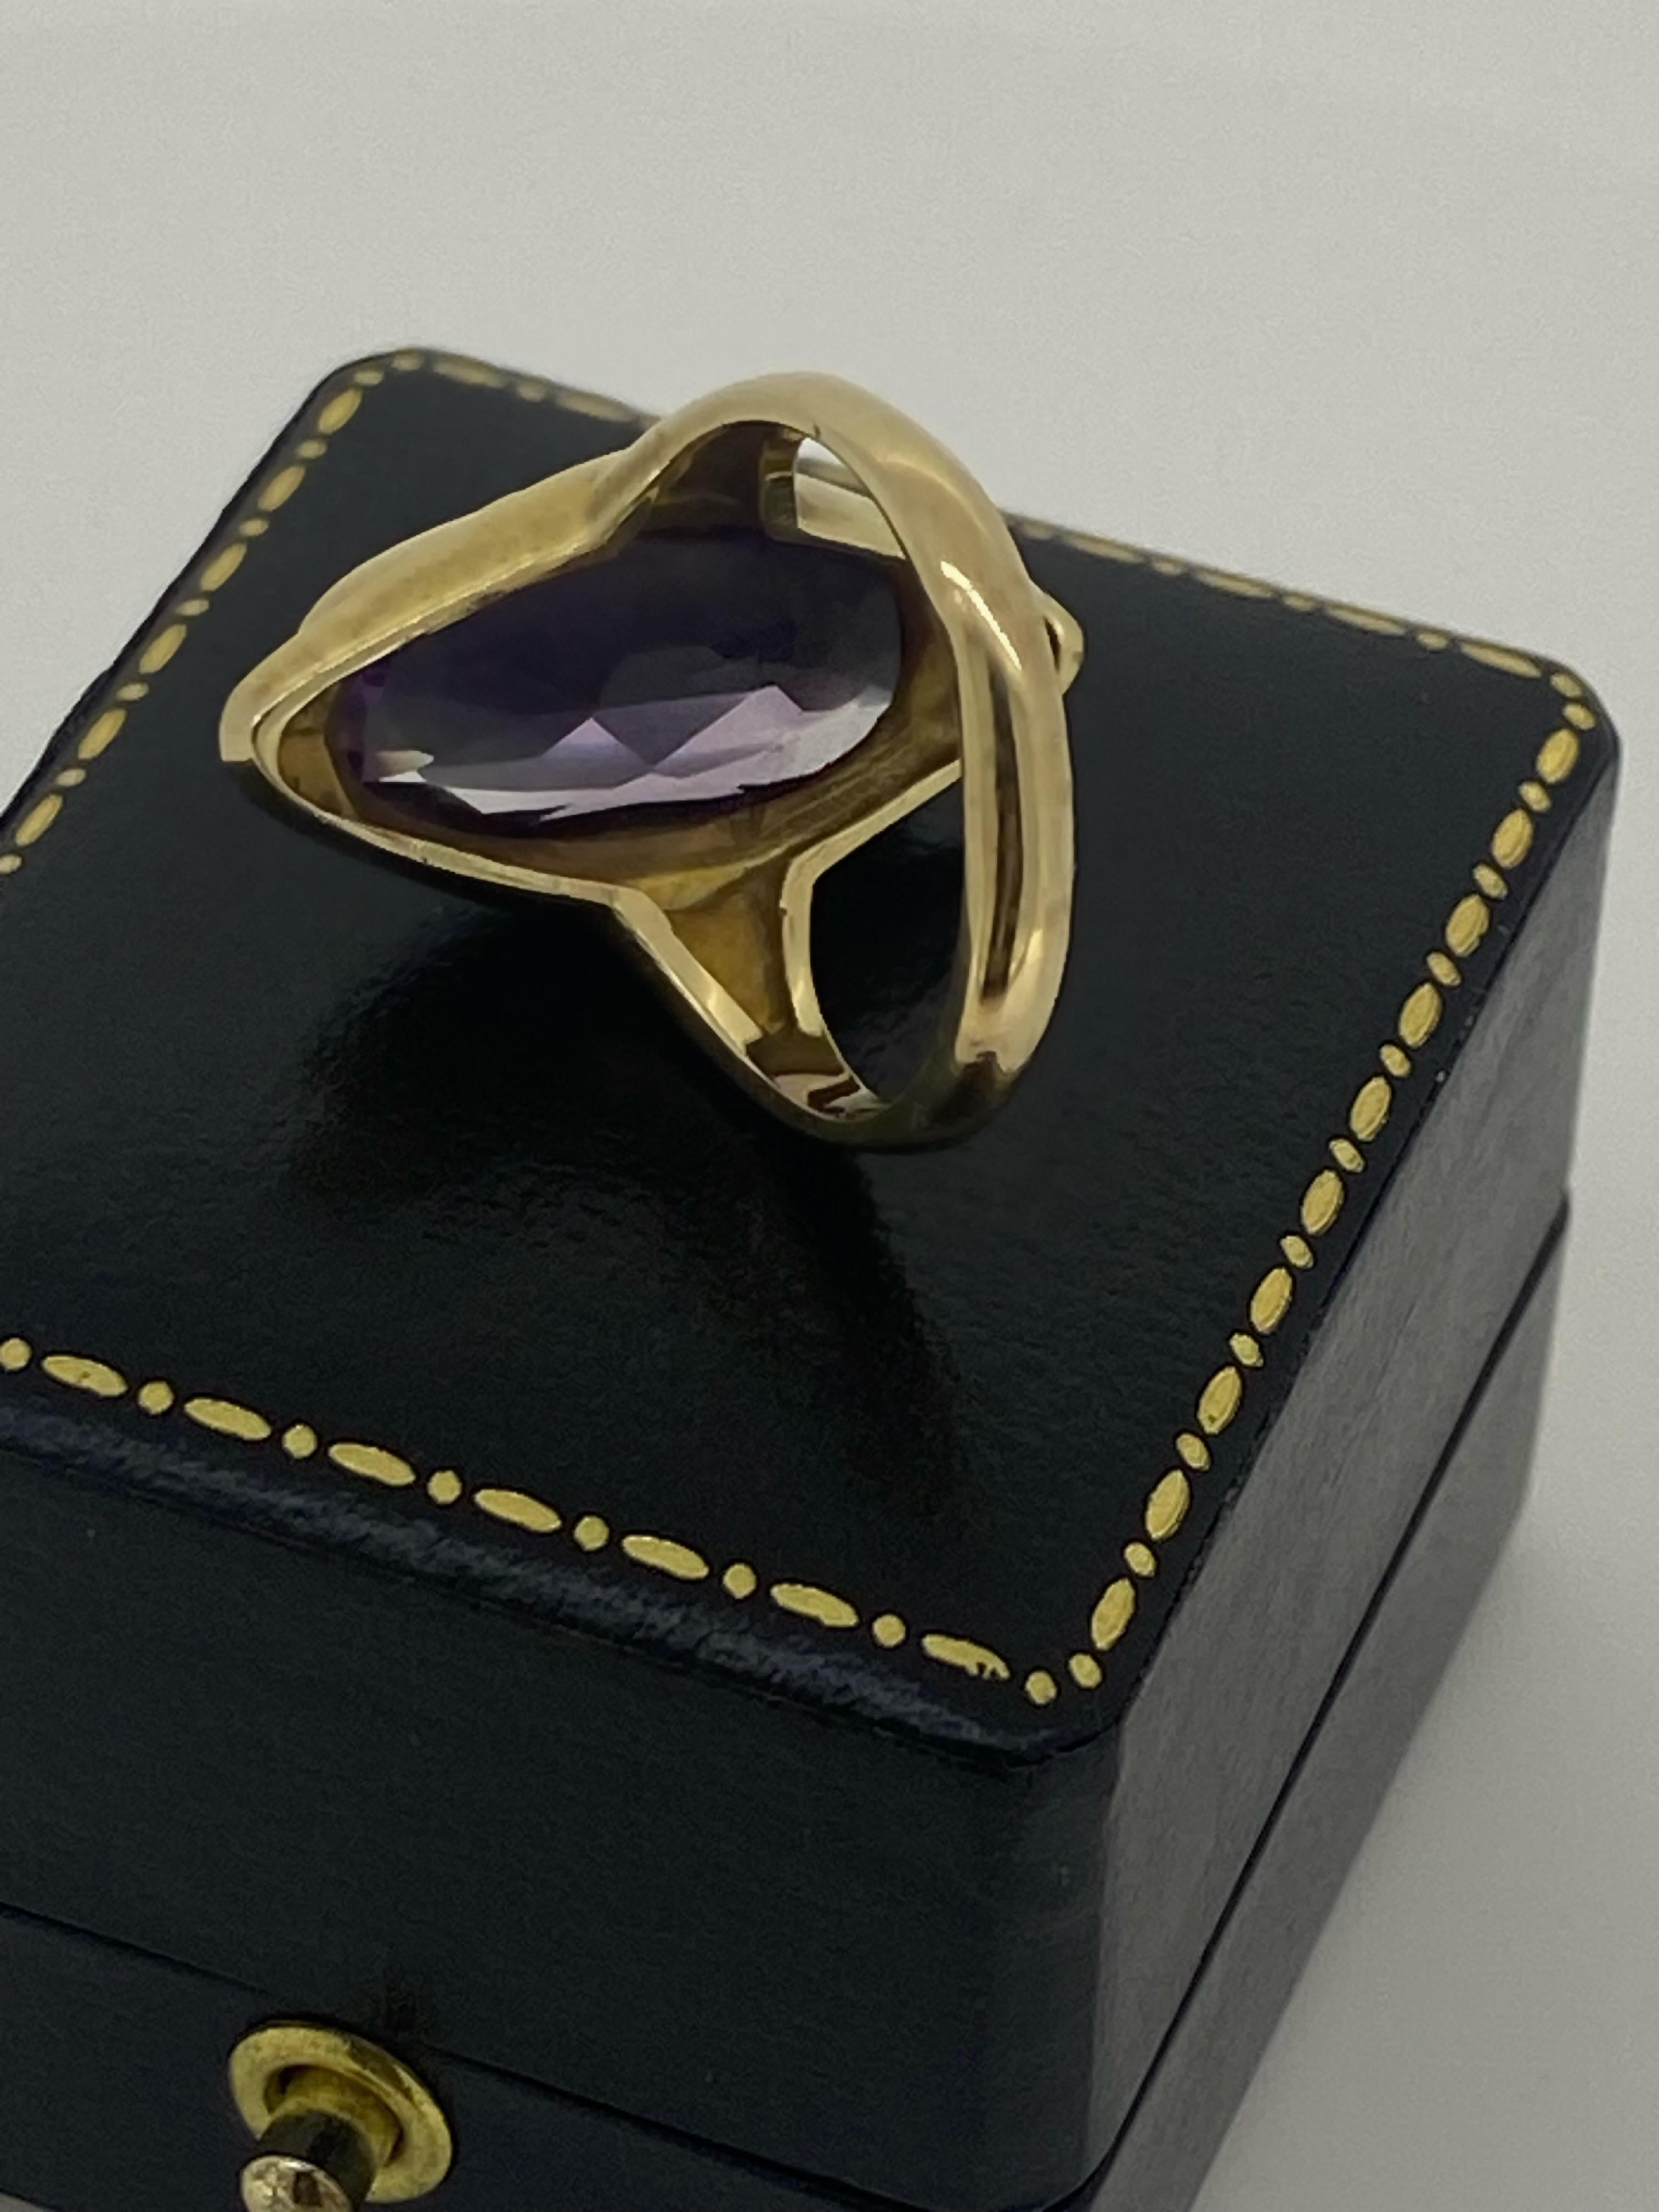 Women's 3.00ct Royal Purple Amethyst Ring in 9K Yellow Gold, c1964, English Hallmarks. For Sale